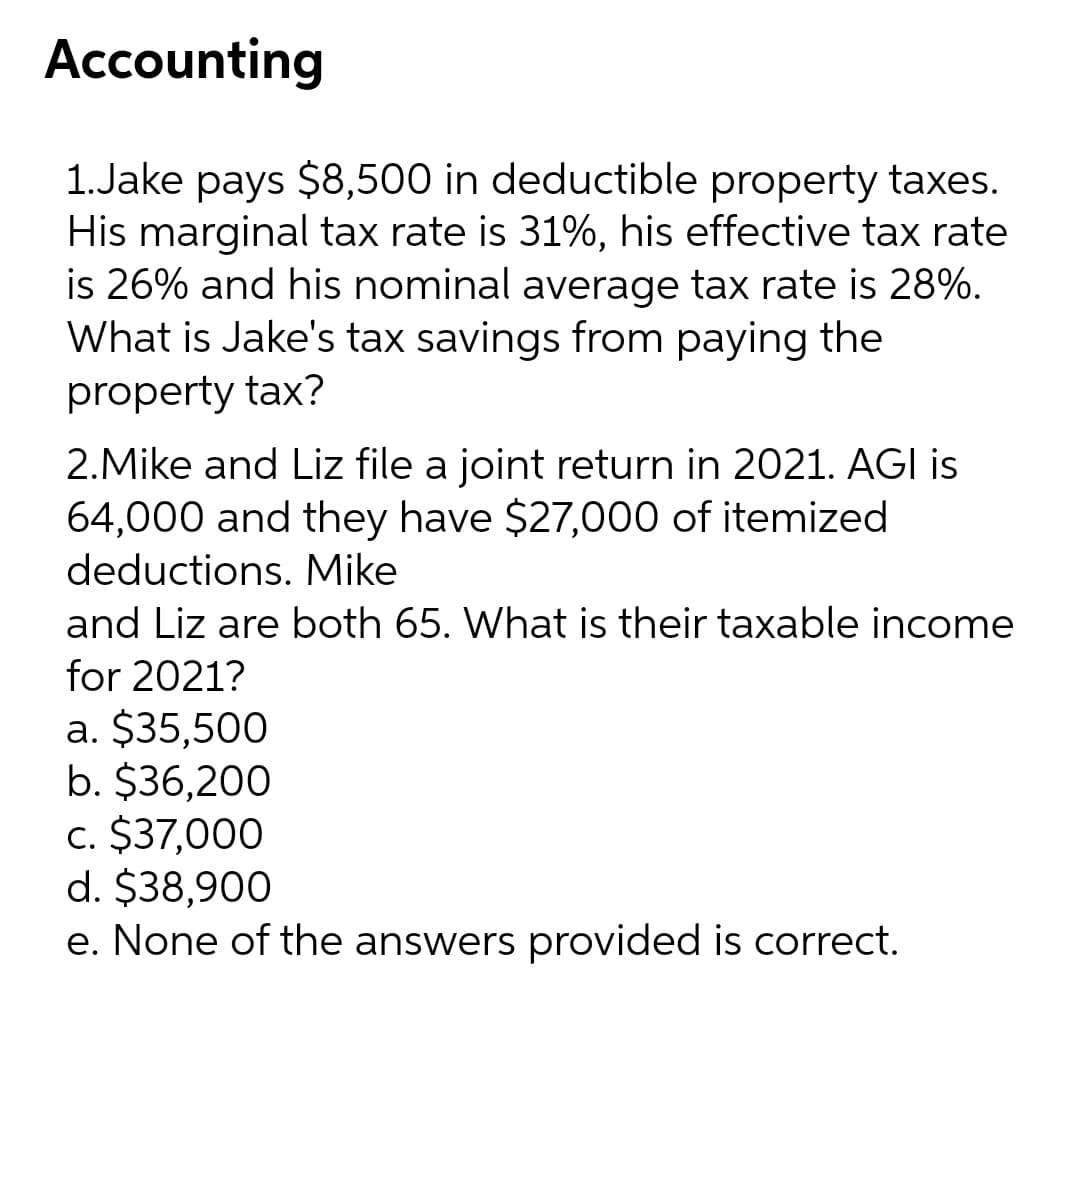 Accounting
1.Jake pays $8,500 in deductible property taxes.
His marginal tax rate is 31%, his effective tax rate
is 26% and his nominal average tax rate is 28%.
What is Jake's tax savings from paying the
property tax?
2.Mike and Liz file a joint return in 2021. AGI is
64,000 and they have $27,000 of itemized
deductions. Mike
and Liz are both 65. What is their taxable income
for 2021?
a. $35,500
b. $36,200
c. $37,000
d. $38,900
e. None of the answers provided is correct.
